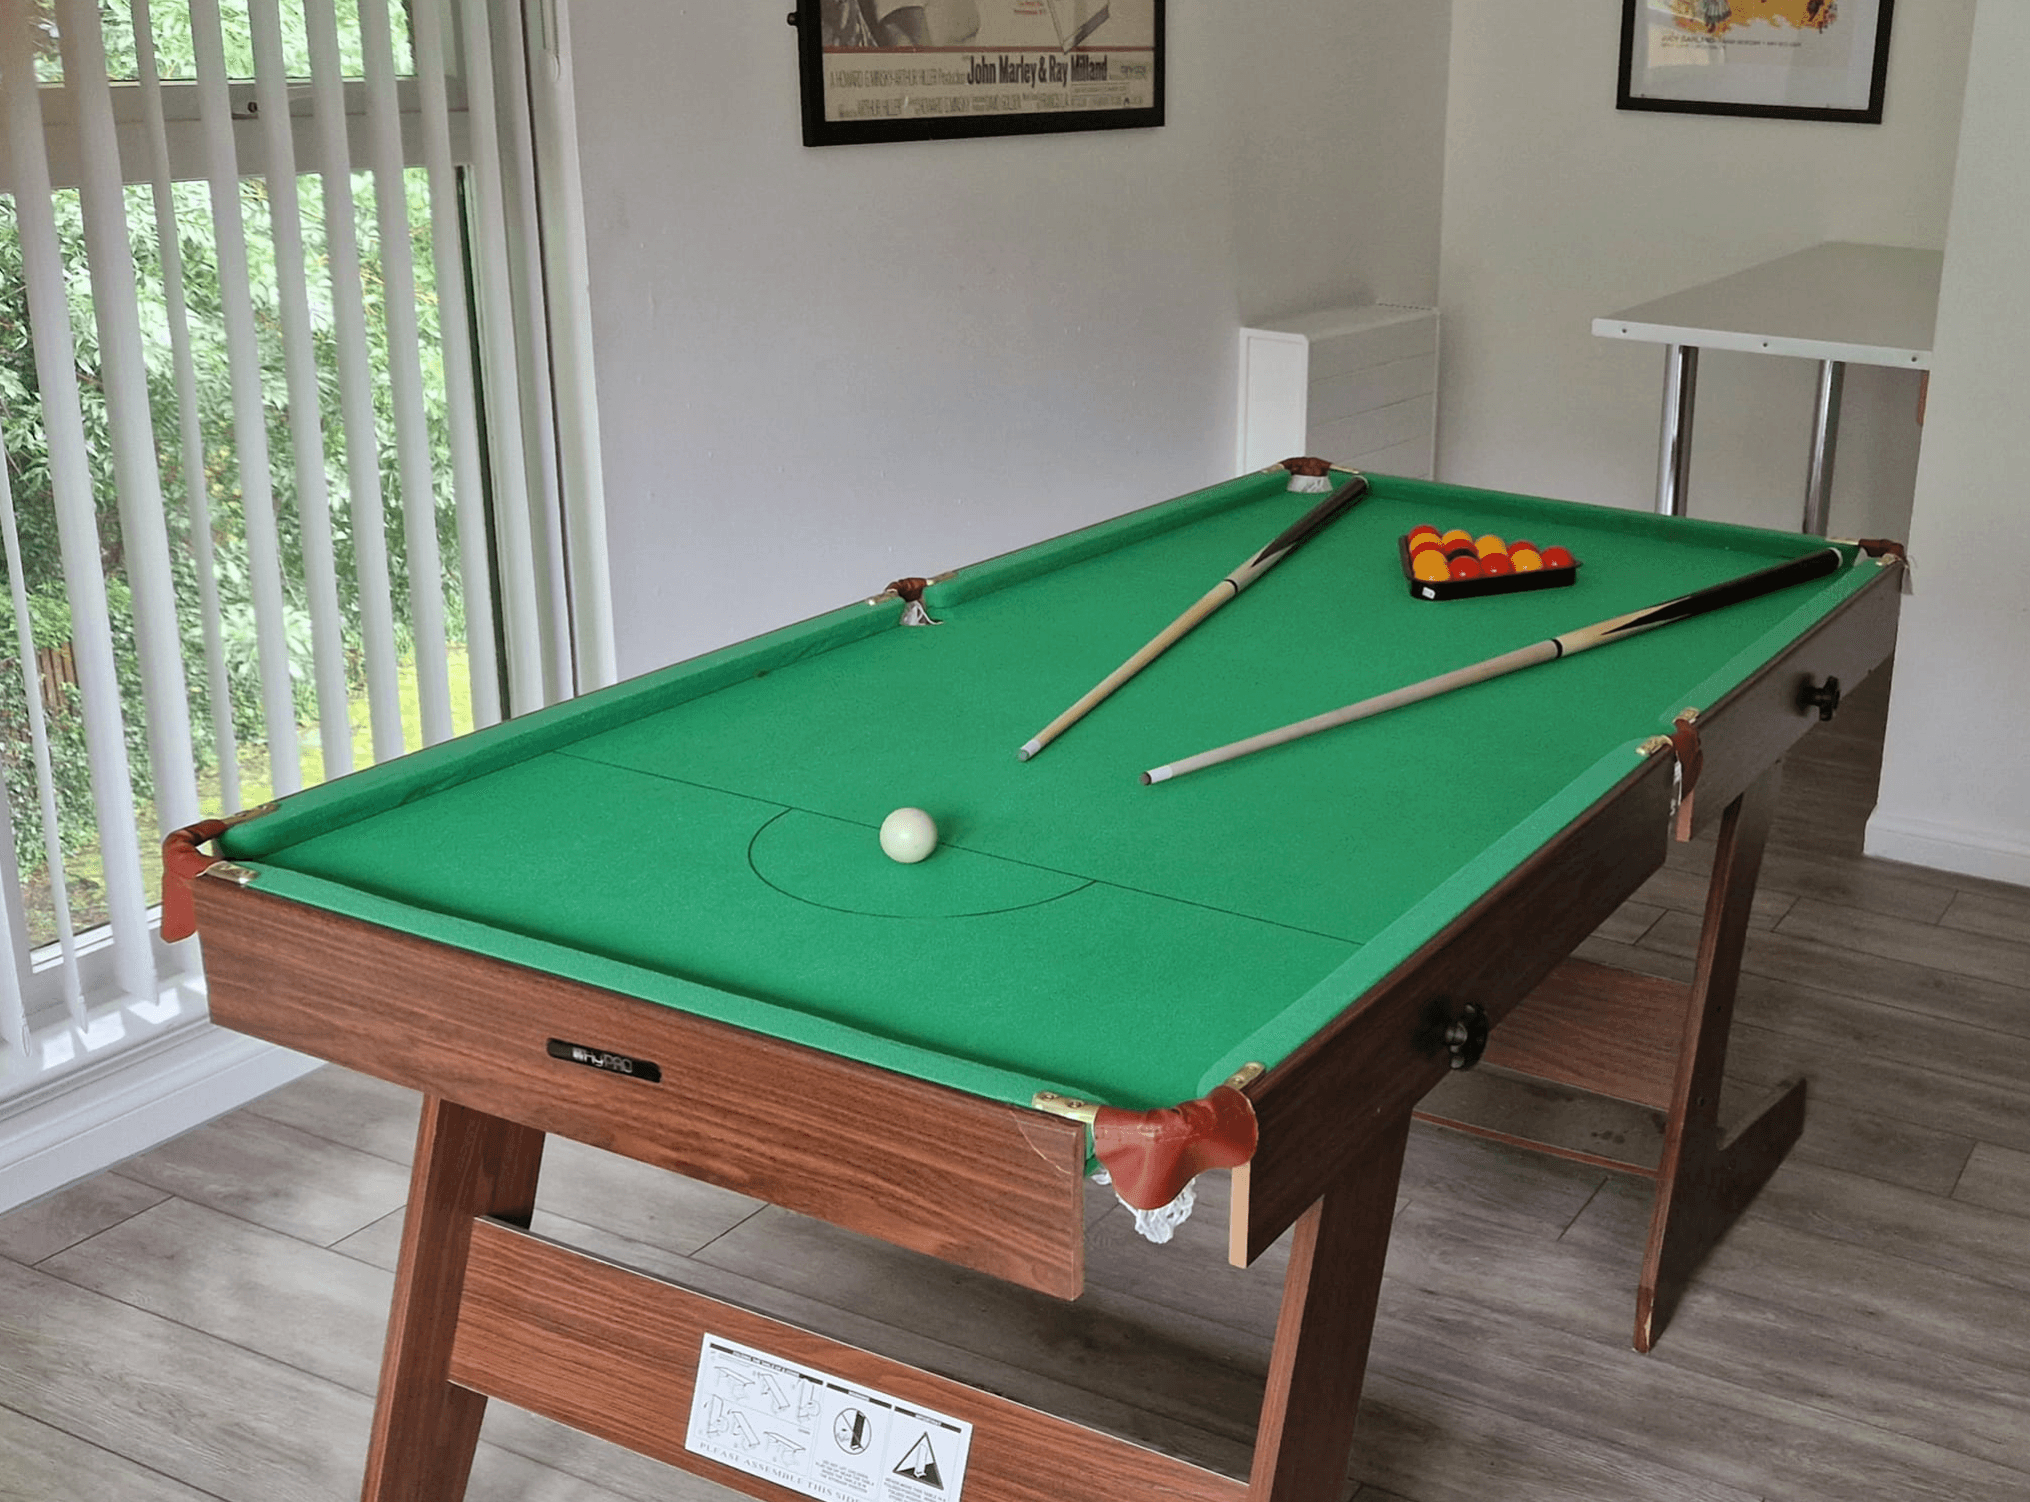 Games Room of Henderson House in Dunfermline, Scotland